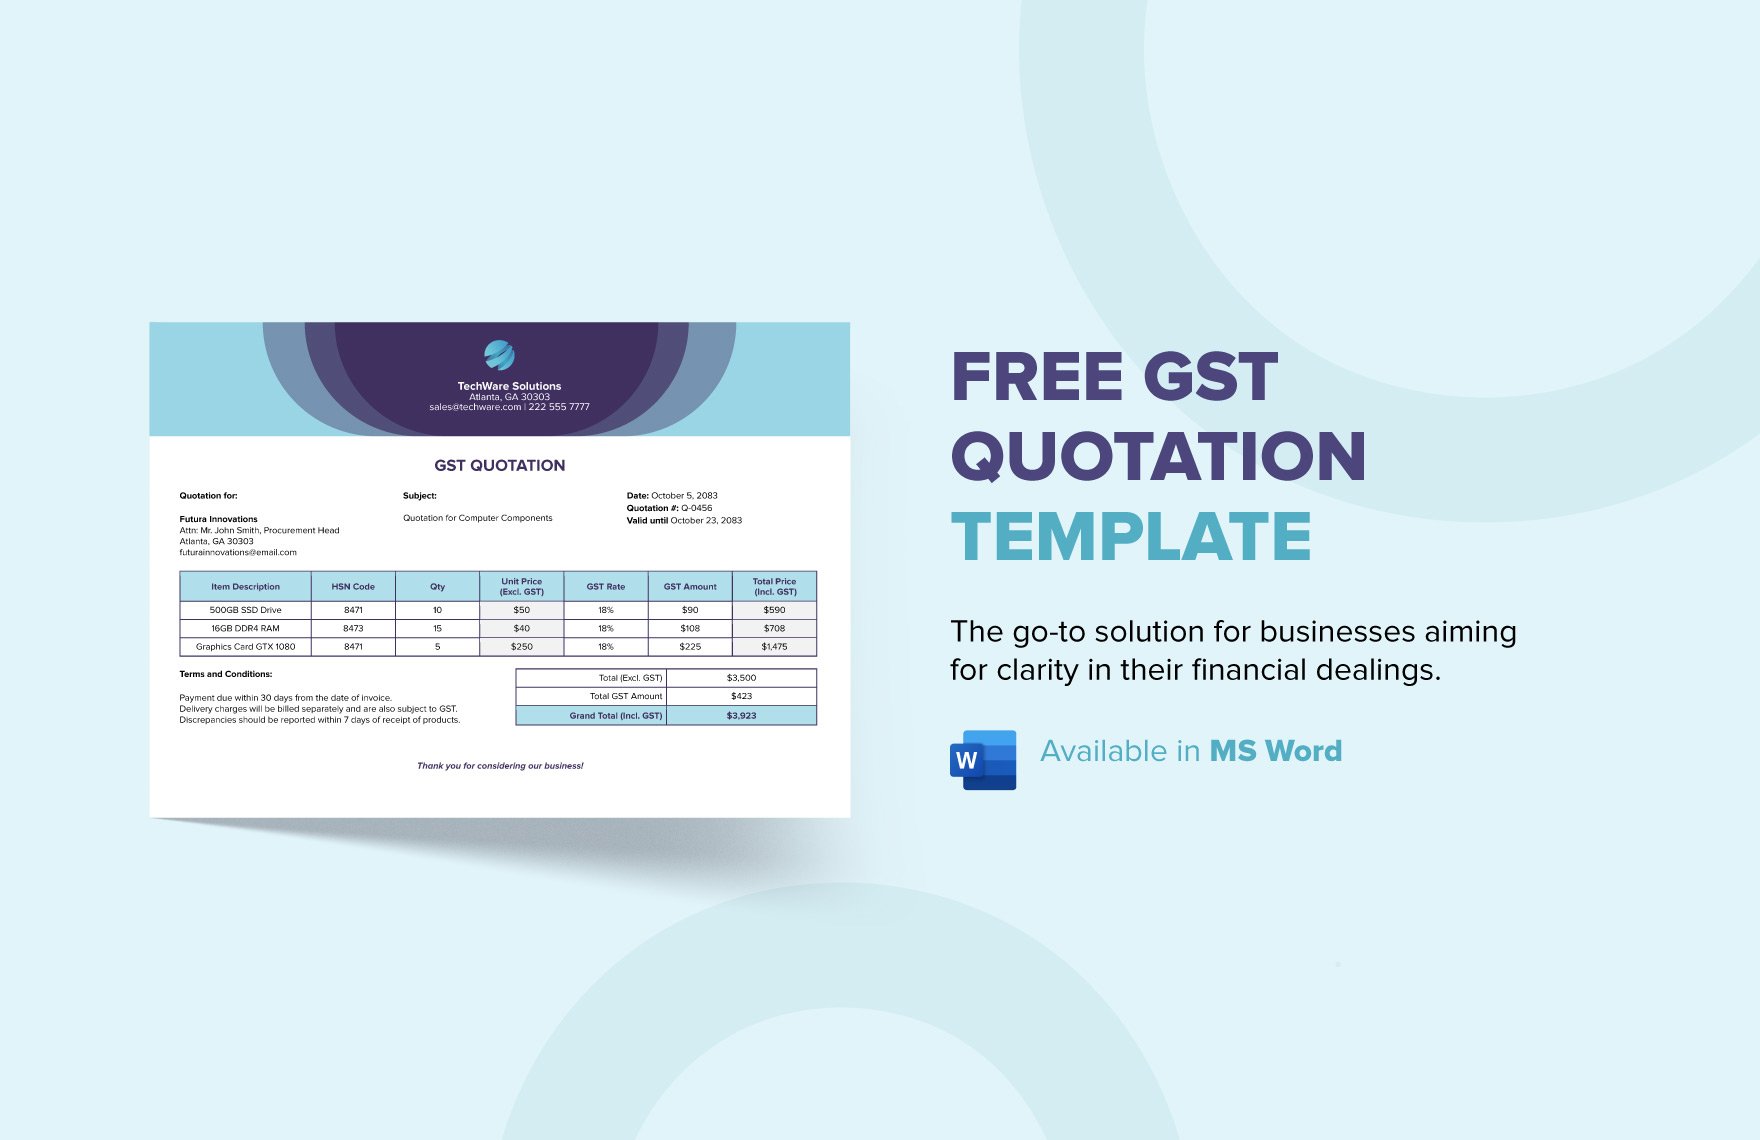 Free GST Quotation Template